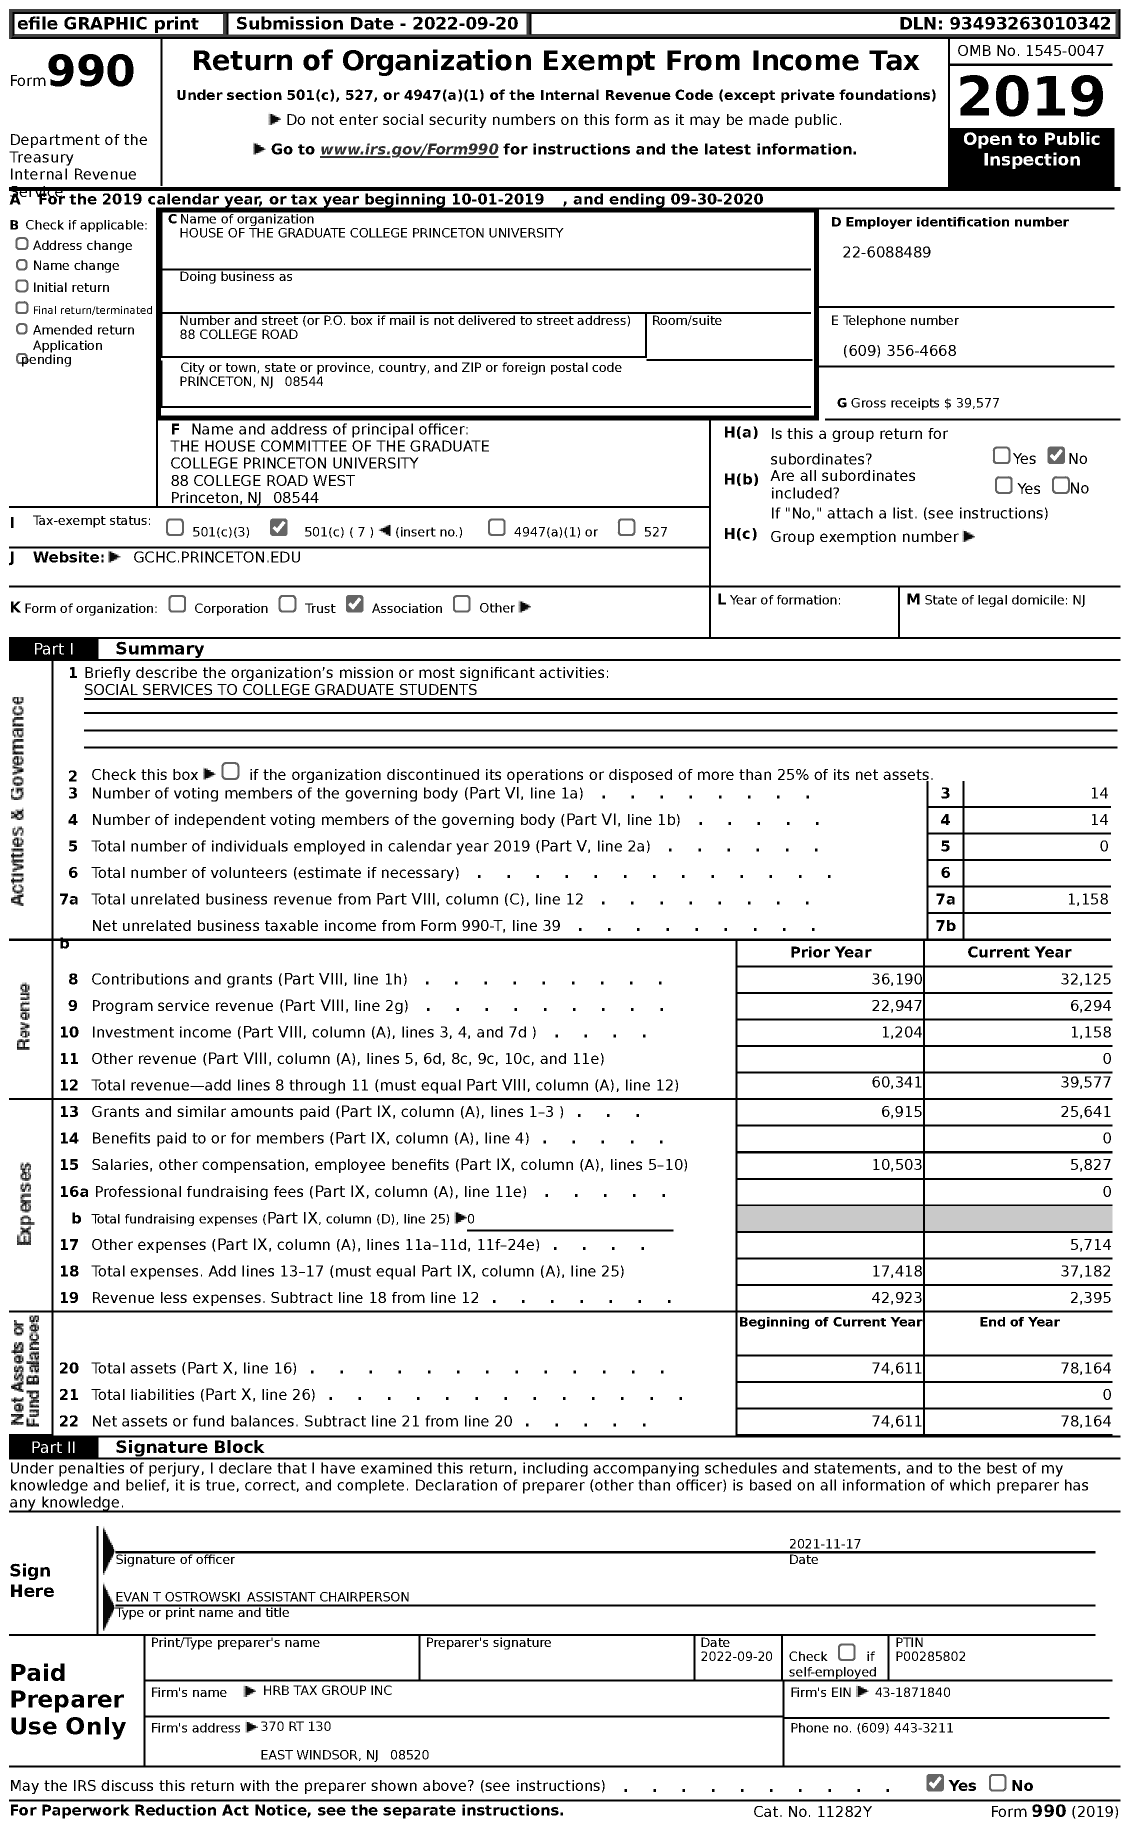 Image of first page of 2019 Form 990 for The House Committee of the Graduate College Princeton University